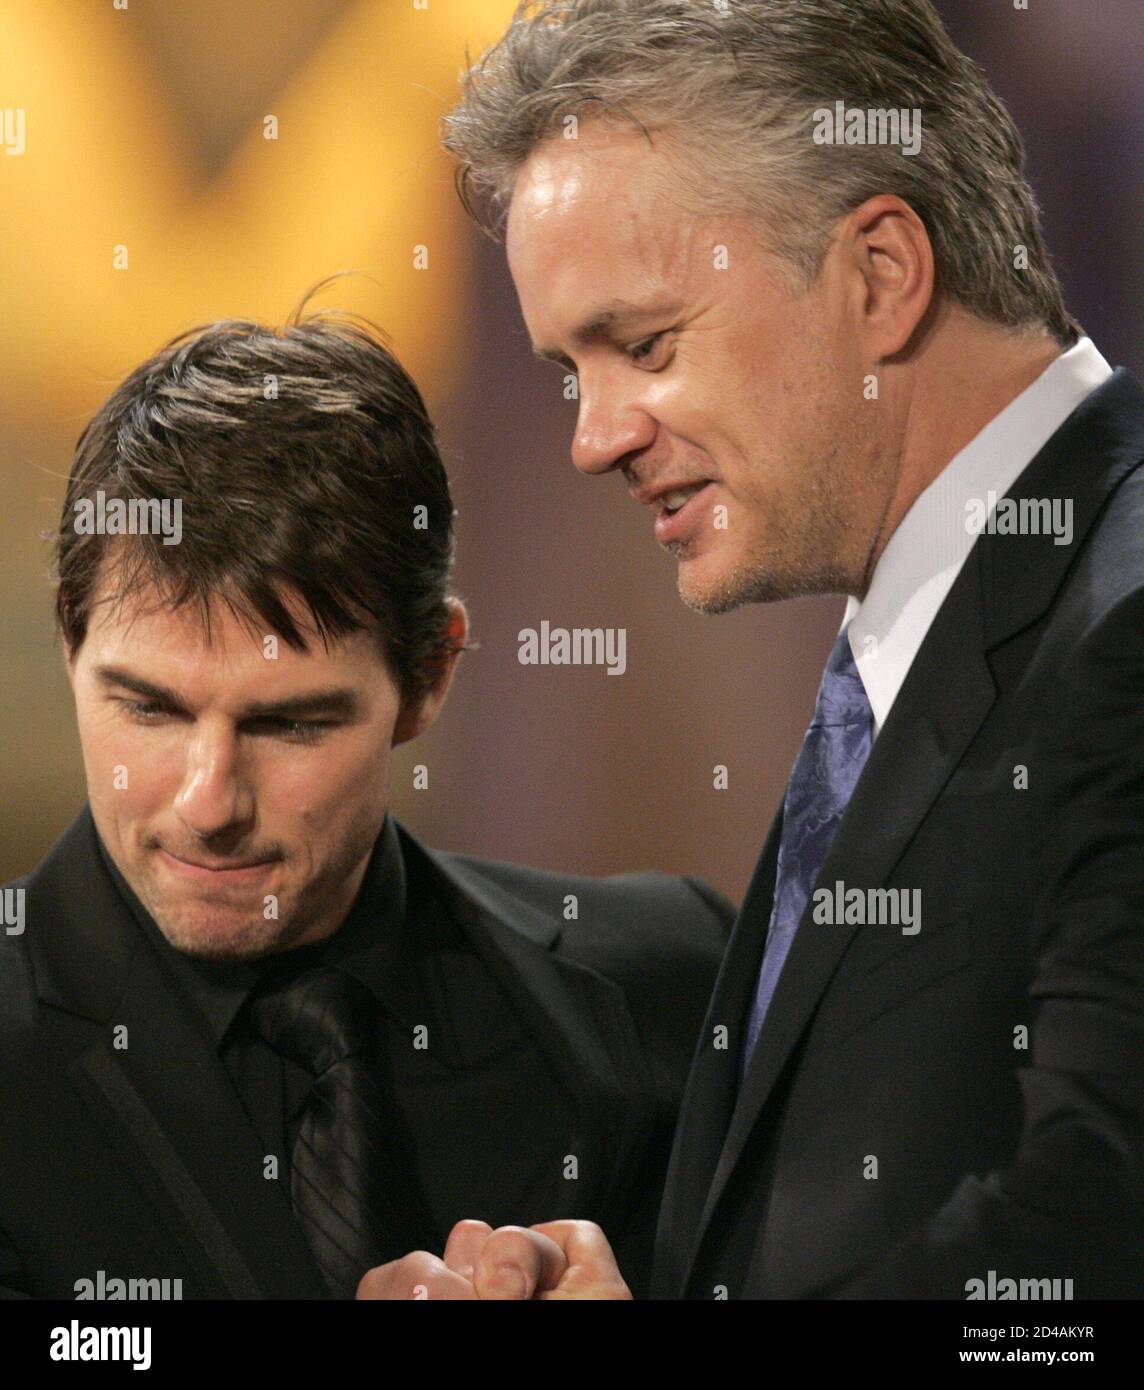 Tom Cruise (L) and Tim Robbins exchange words during the 10th Annual  Critics' Choice Awards at the Wiltern Theater in Los Angeles, California  January 10, 2005. Film reviewers of the U.S. raised